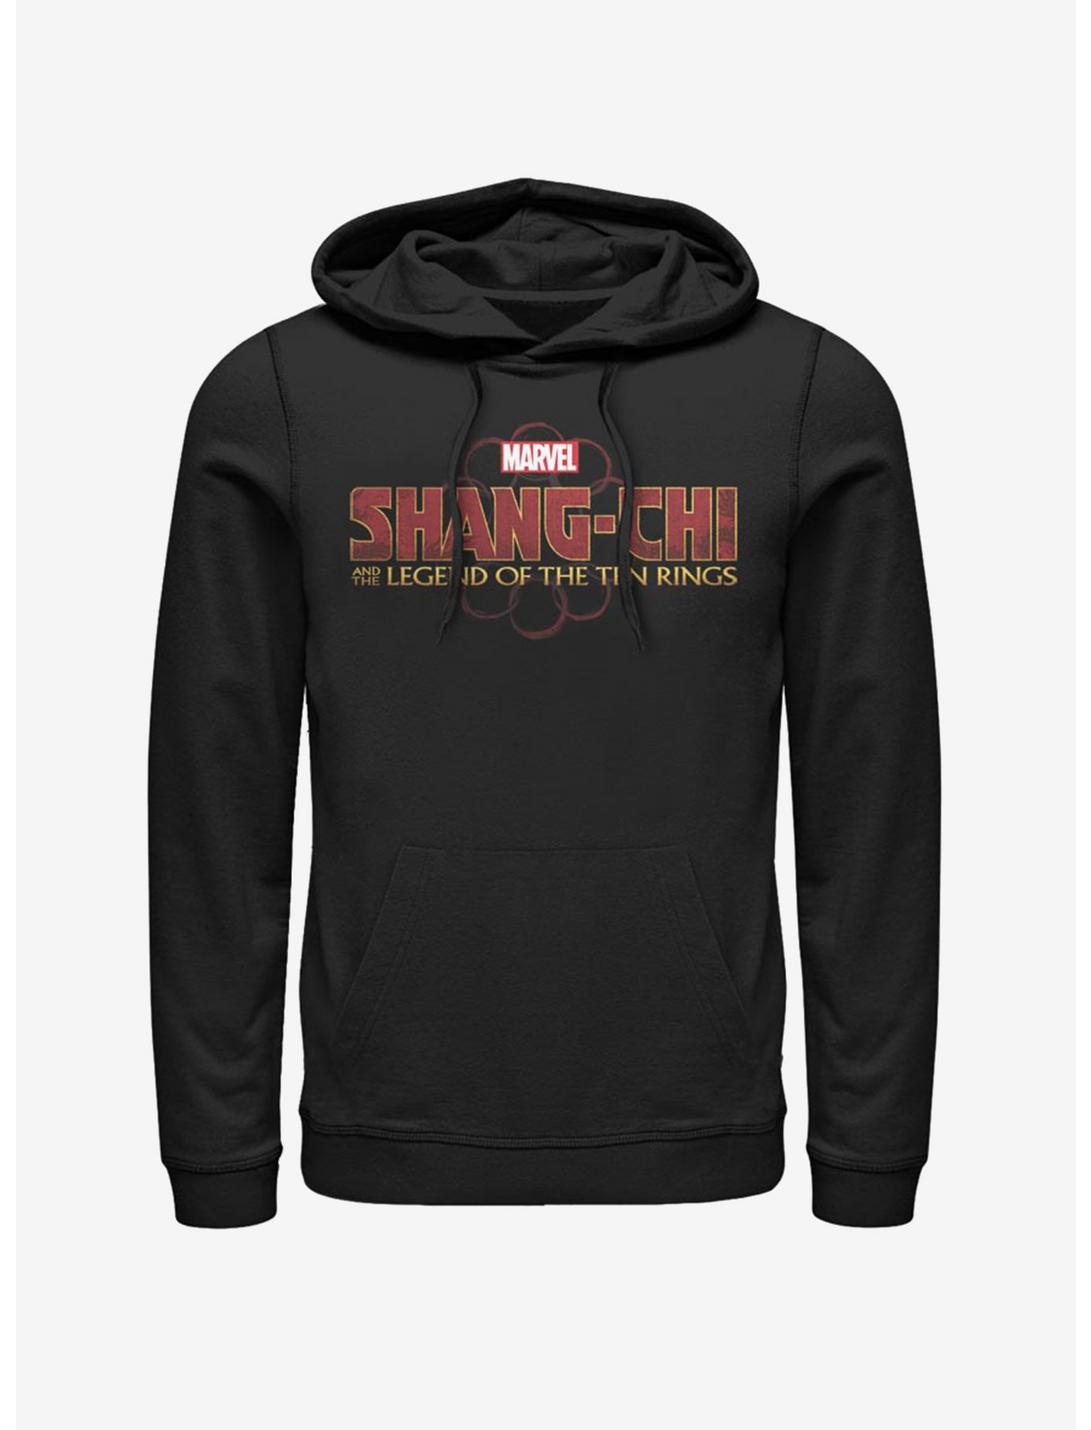 Marvel Shang-Chi And The Legend Of The Ten Rings Hoodie, BLACK, hi-res